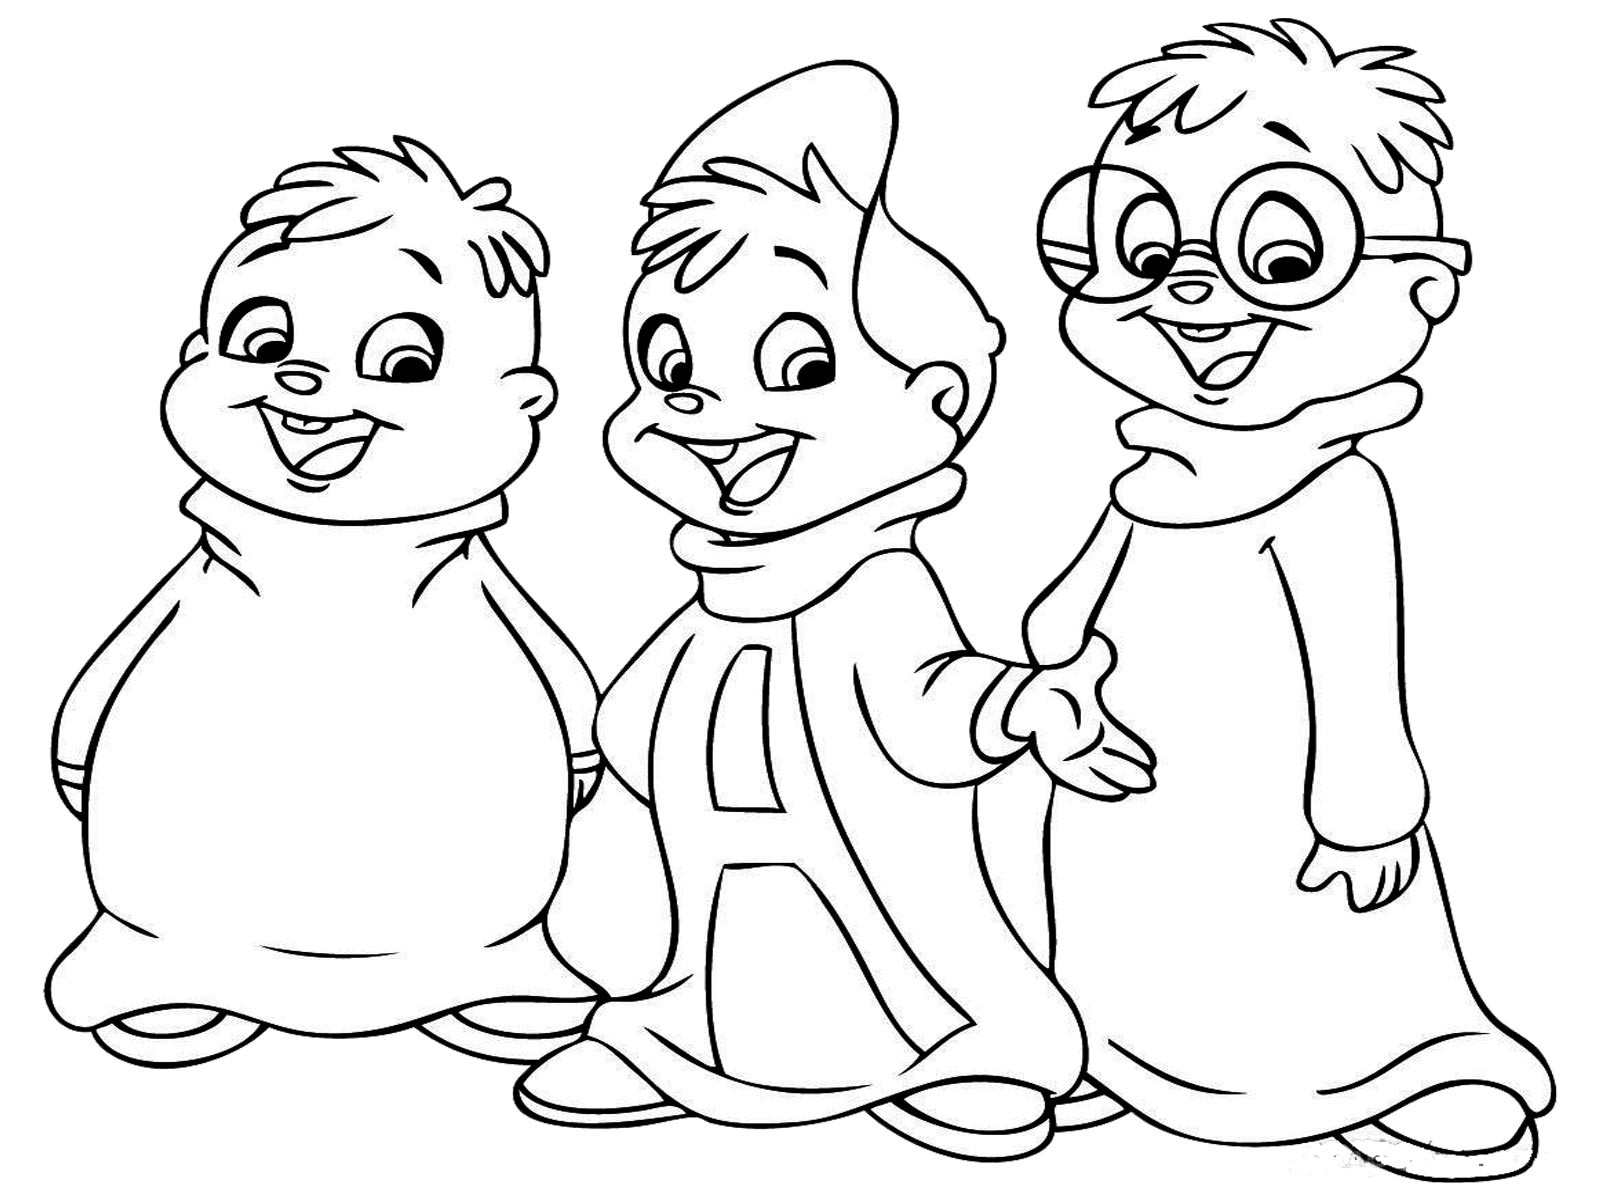 Coloring Pages With Details Boys
 Coloring Pages for Boys 2018 Dr Odd